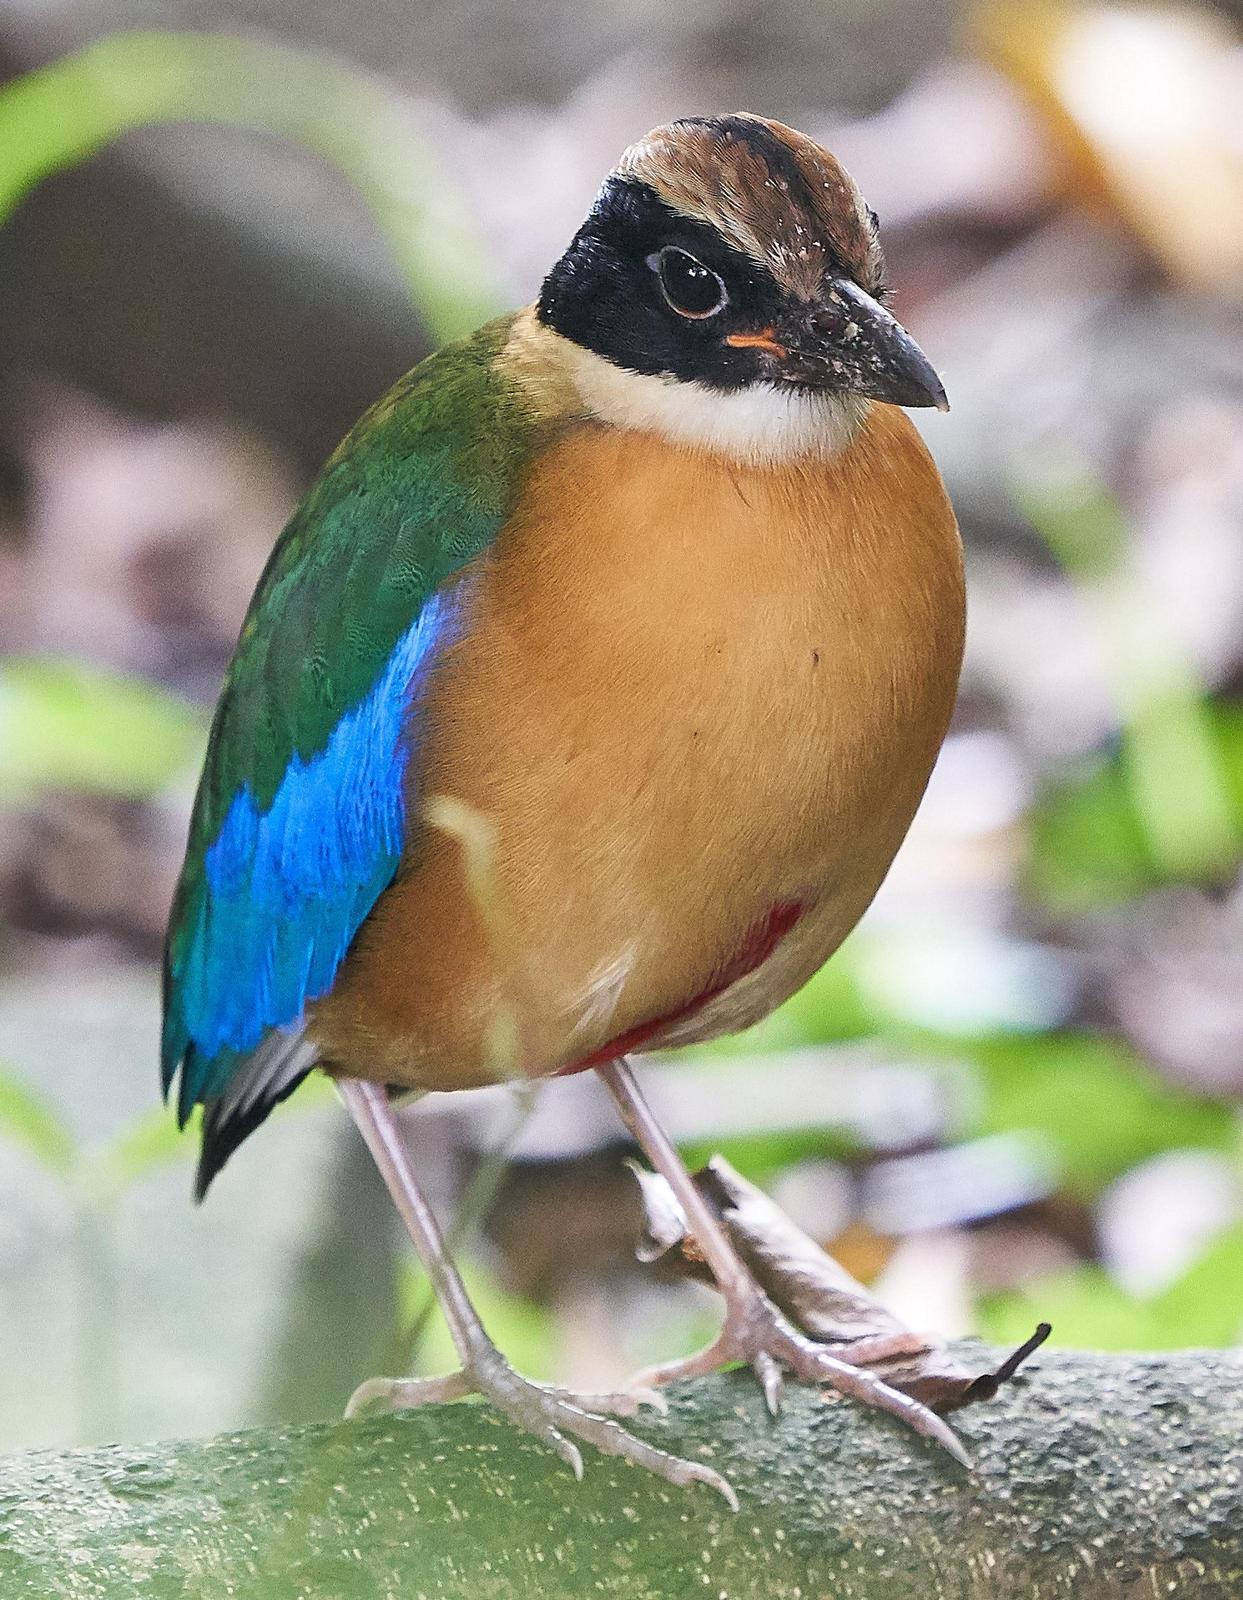 Blue-winged Pitta Photo by Steven Cheong